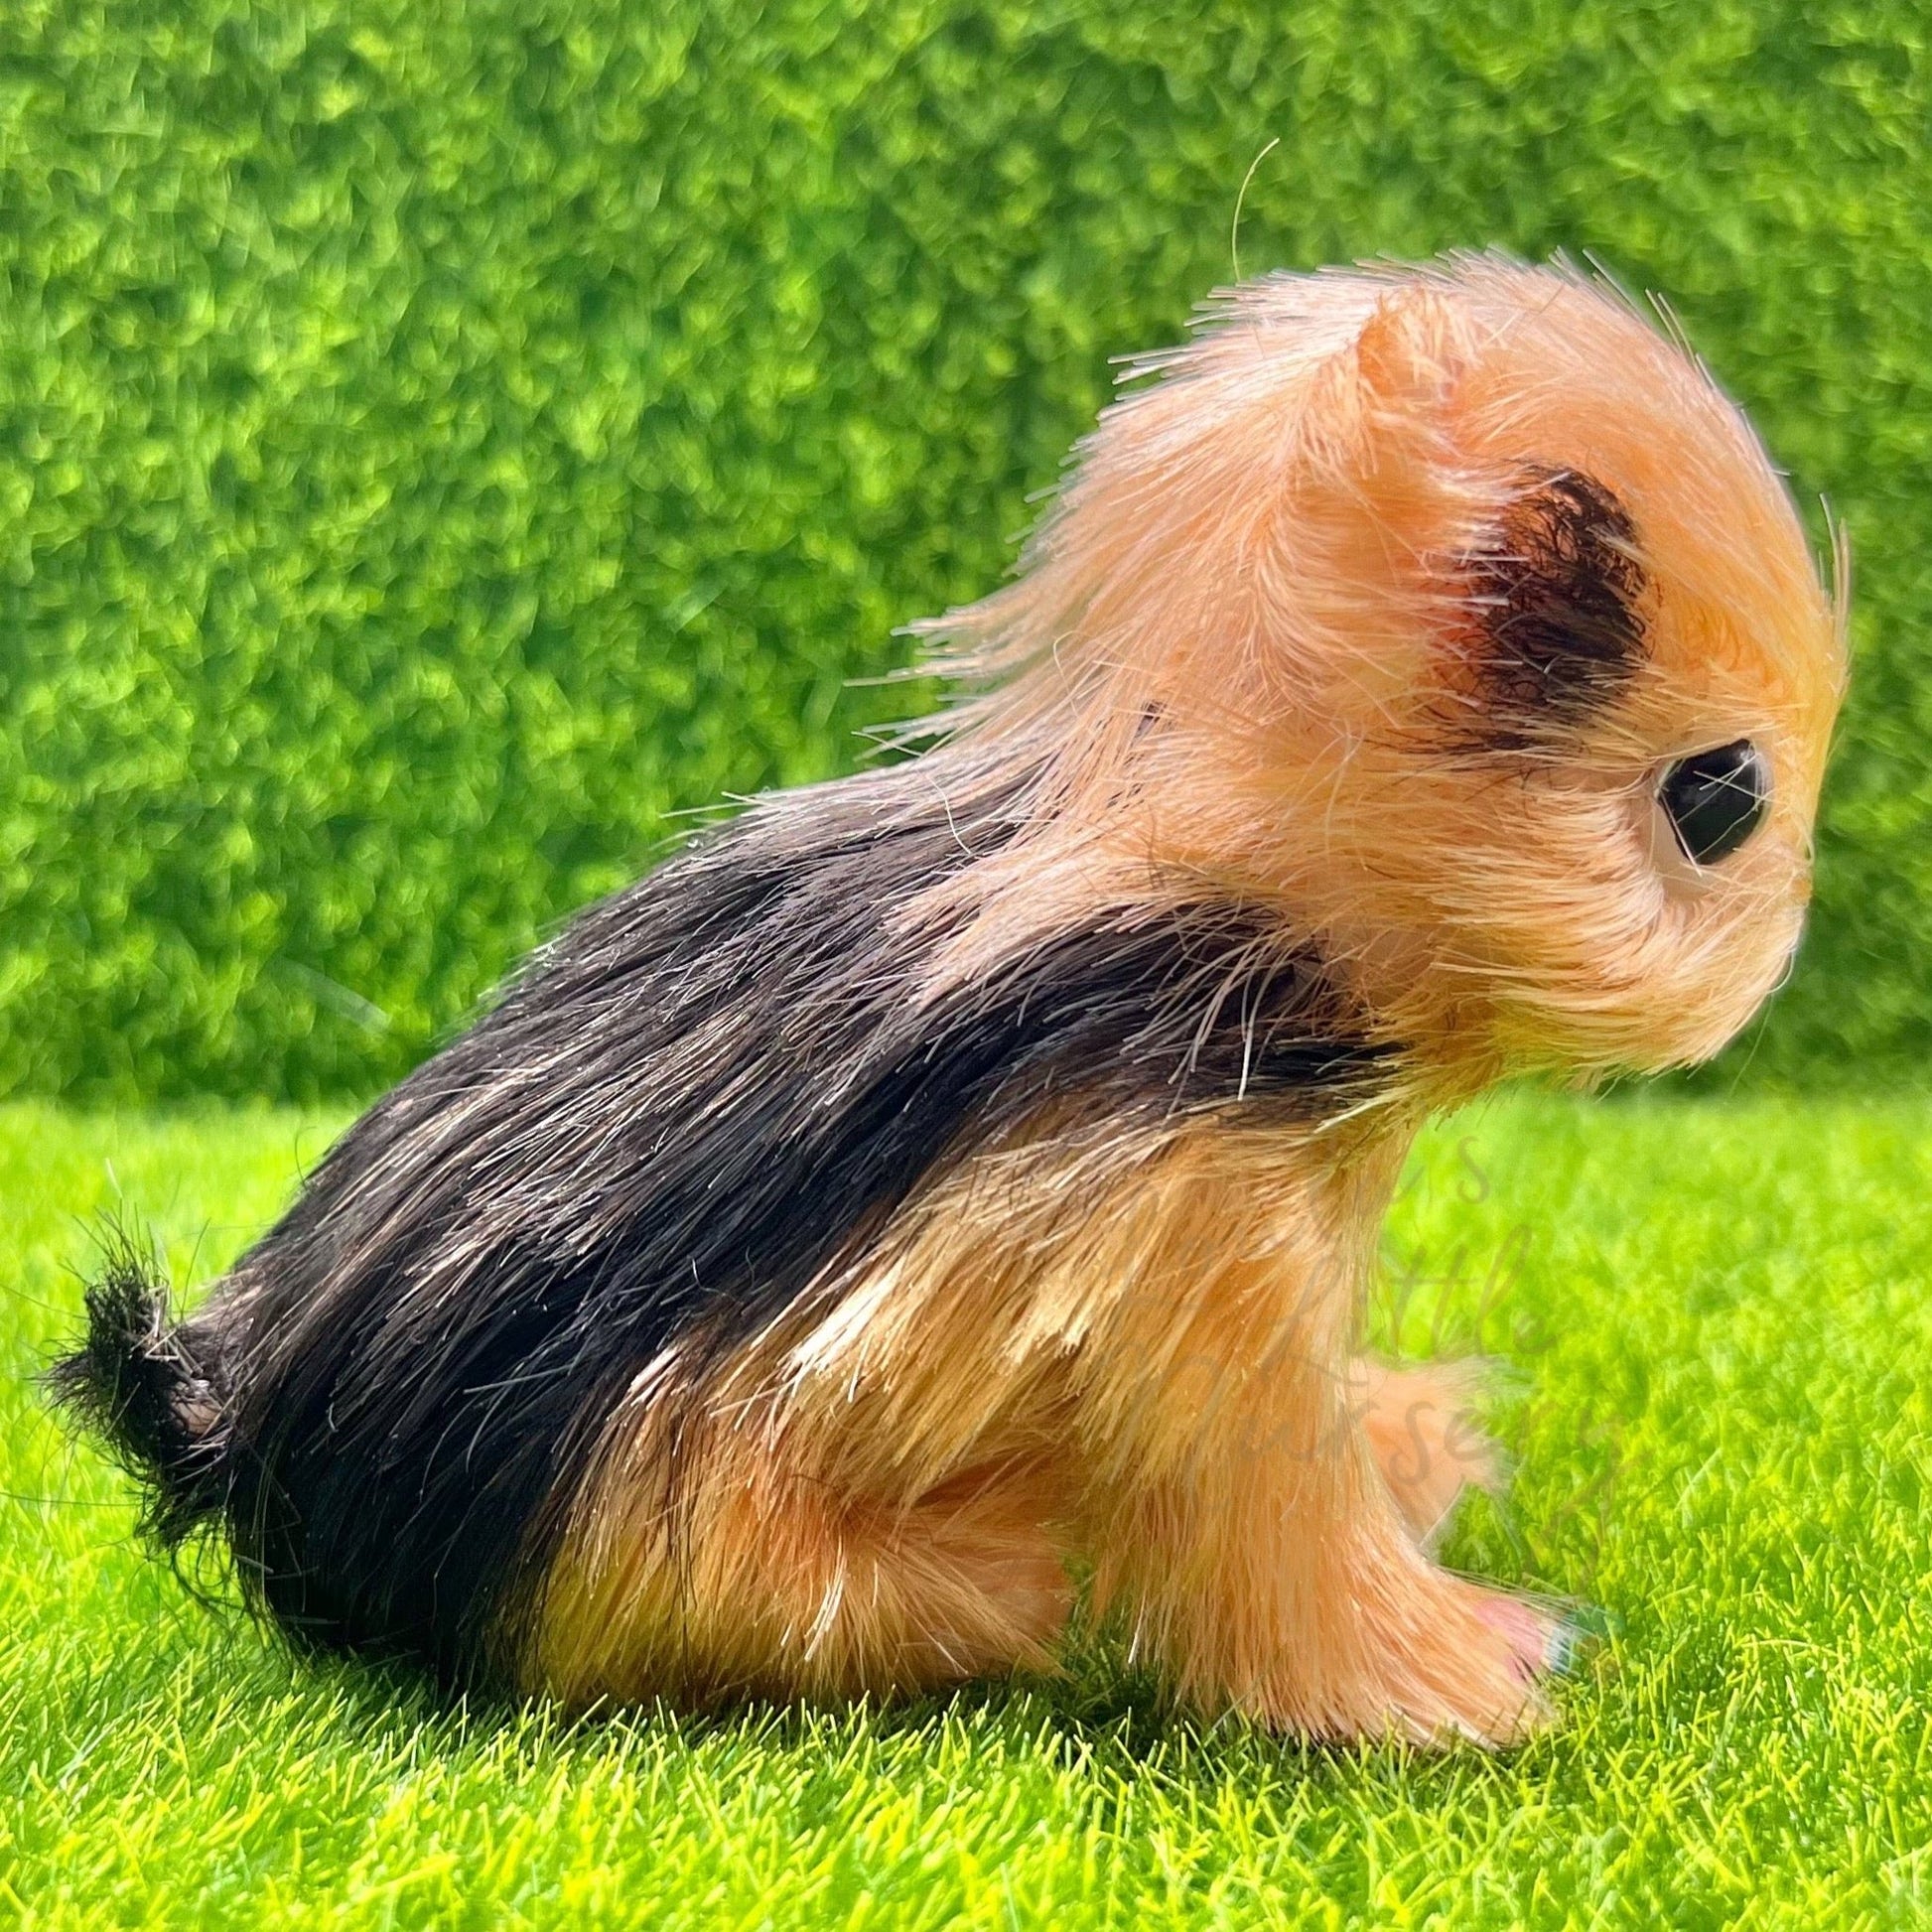 Rover The Yorkshire Terrier Puppy - Loula’s Little Nursery